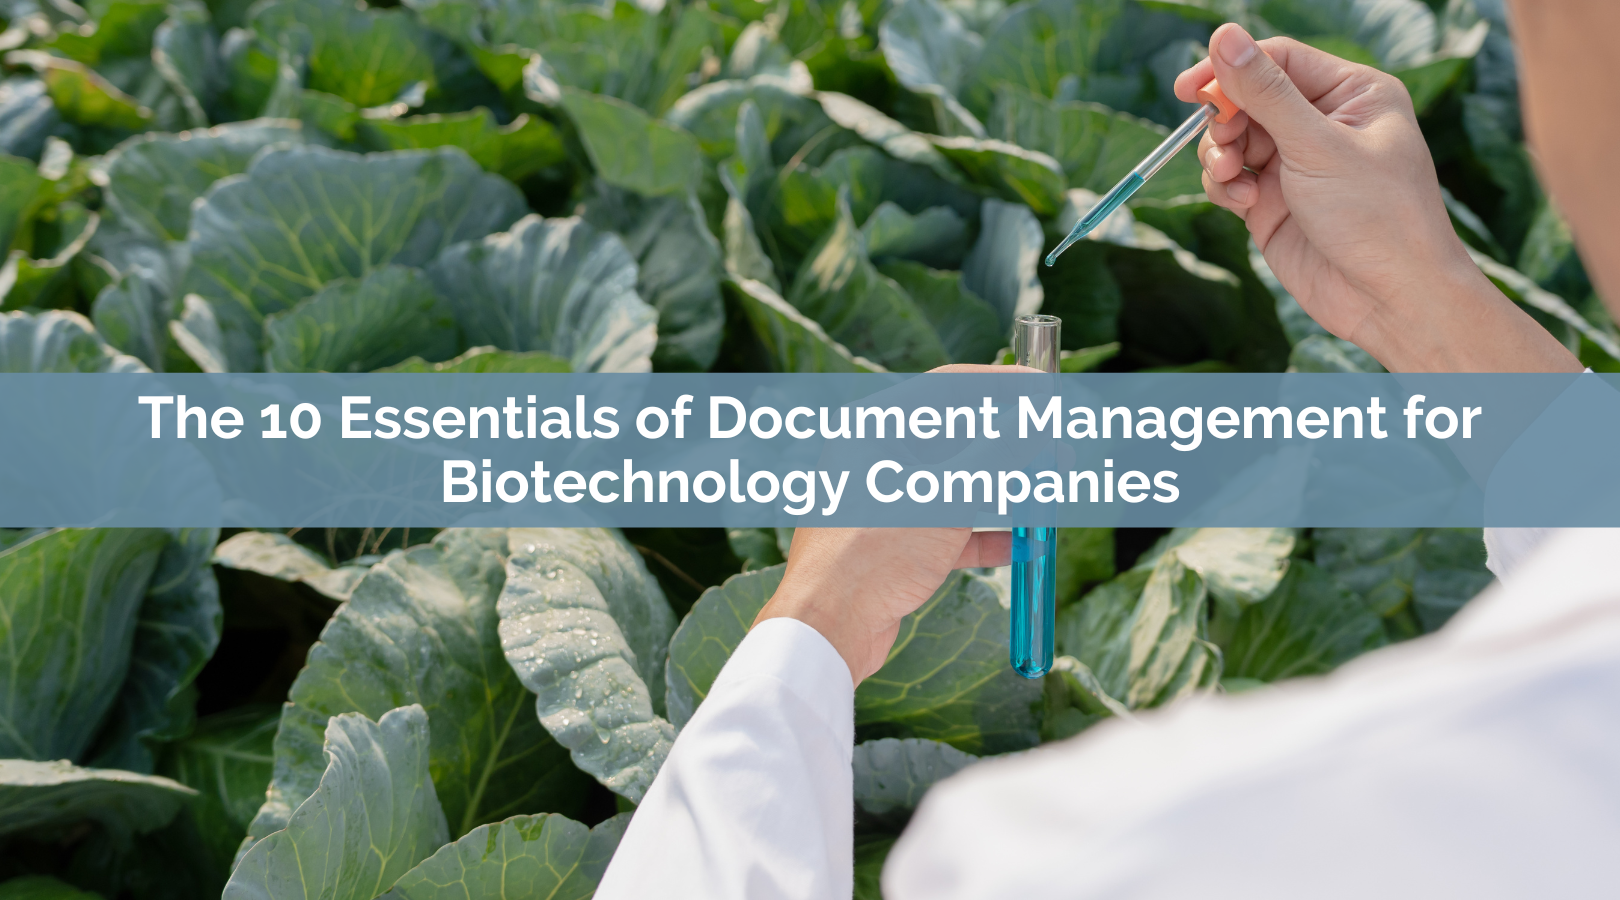 The 10 Essentials of Document Management for Biotechnology Companies